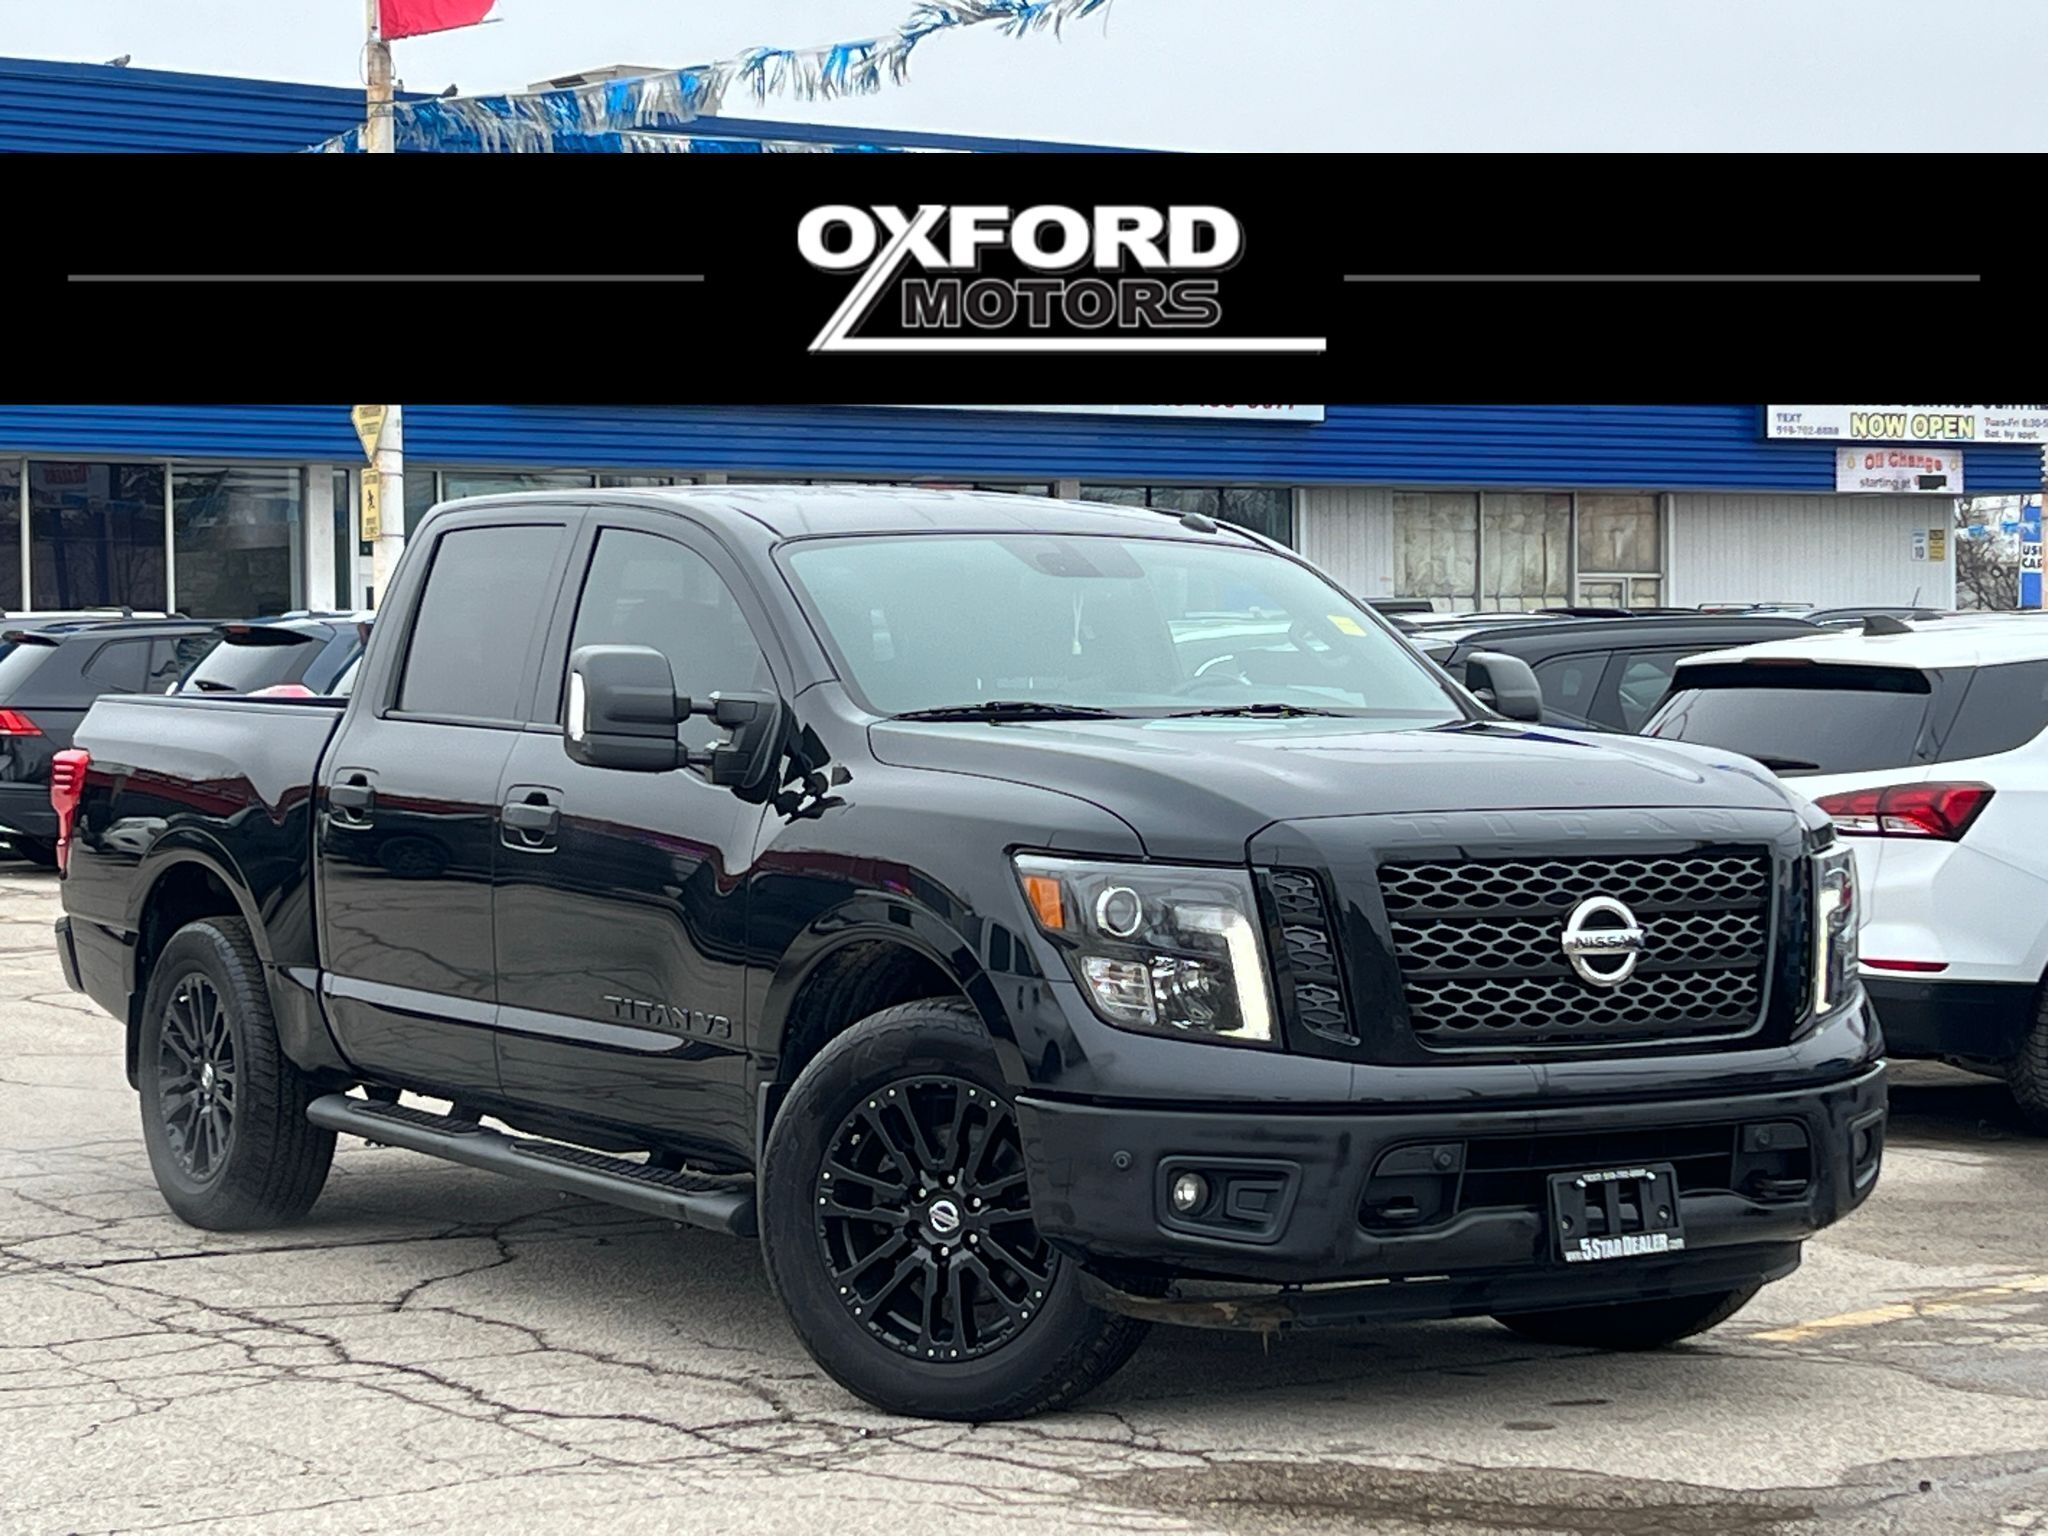 2018 Nissan Titan AWD LEATHER MINT! LOADED! WE FINANCE ALL CREDIT!